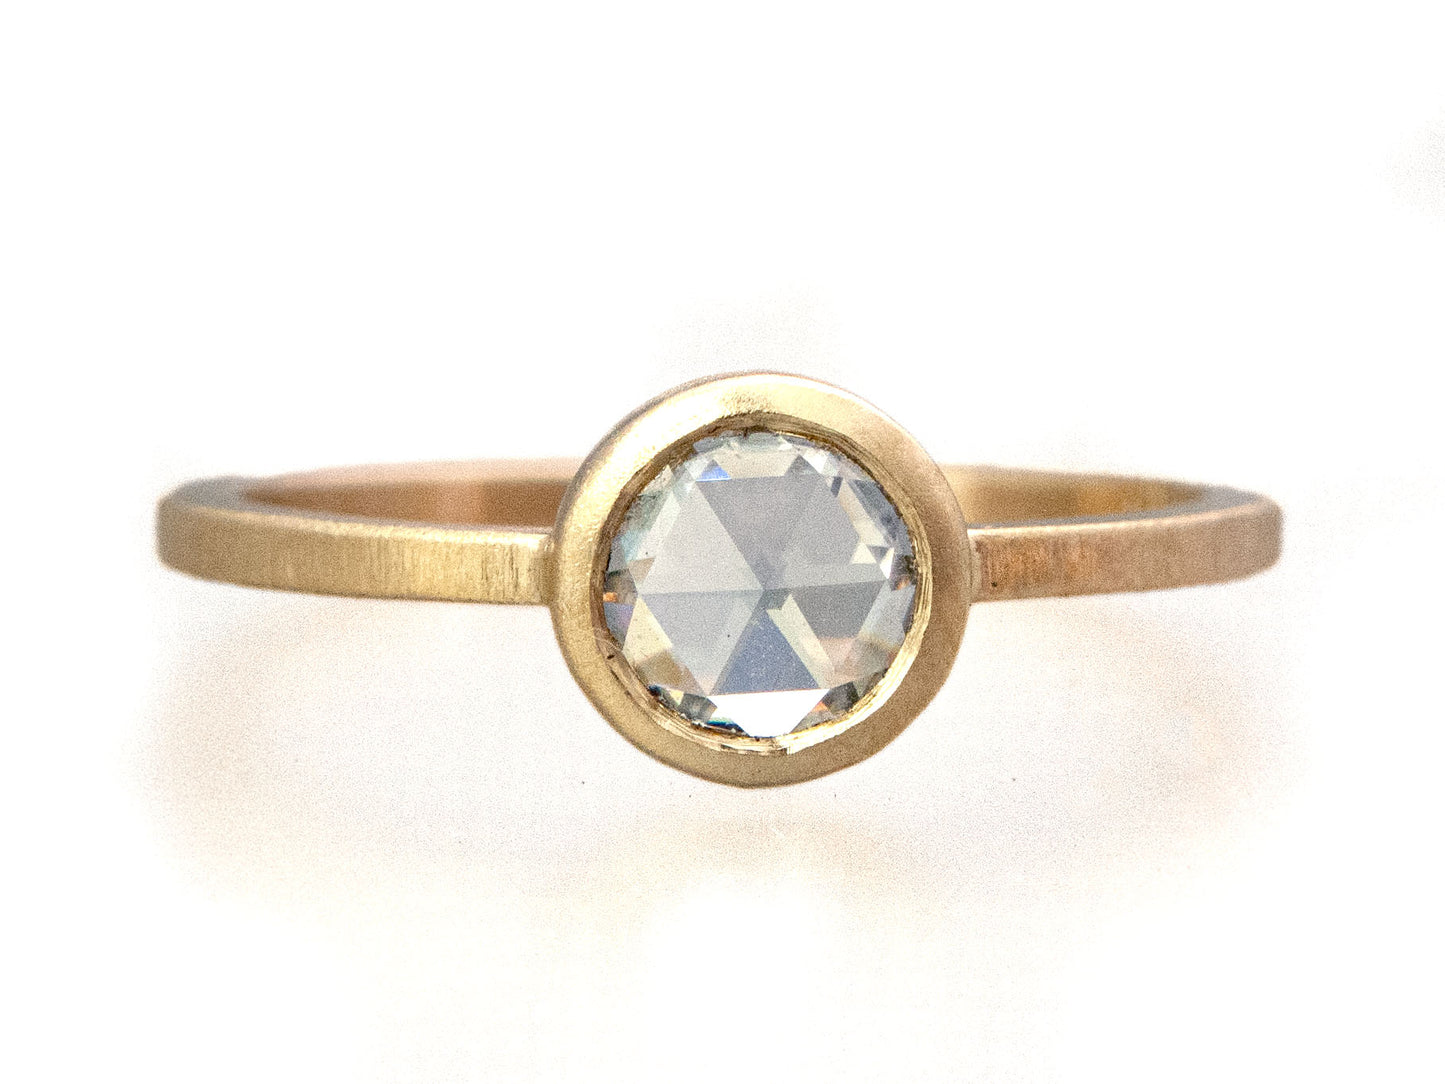 VS Rose Cut Diamond Engagement Ring in 14k Gold with a low round bezel and slim square band